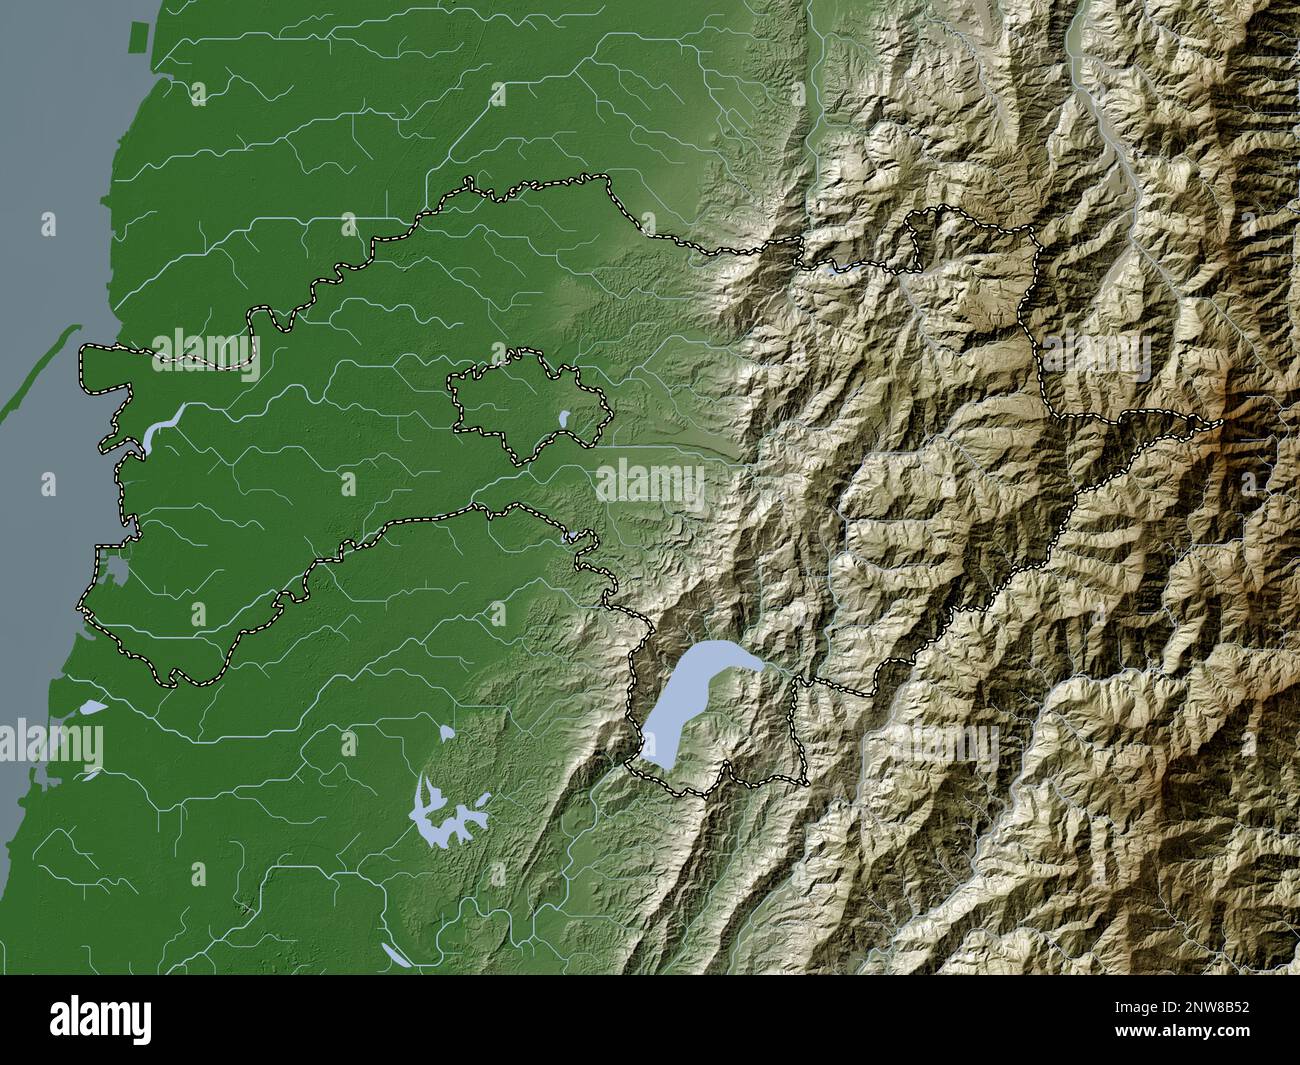 Chiayi, county of Taiwan. Elevation map colored in wiki style with lakes and rivers Stock Photo